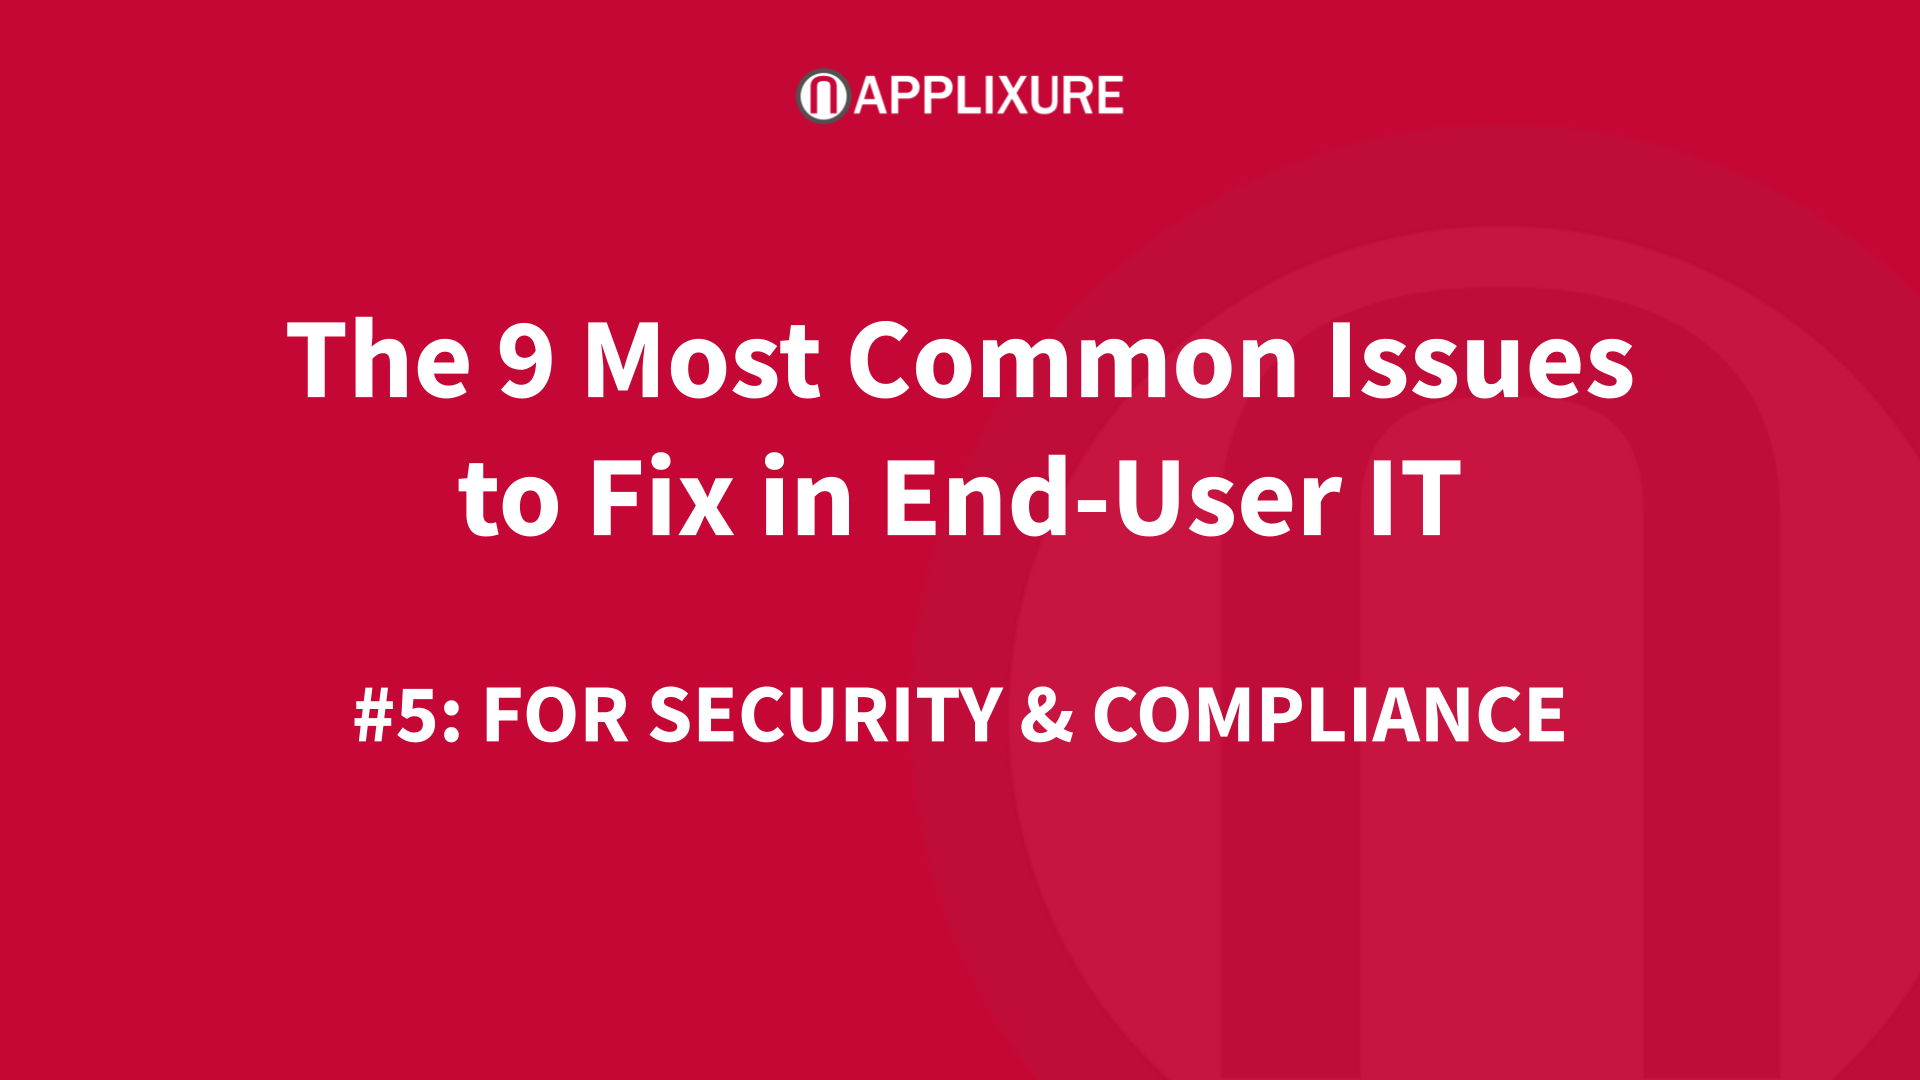 3 Most Common End-User IT Issues Affecting IT Security and Compliance